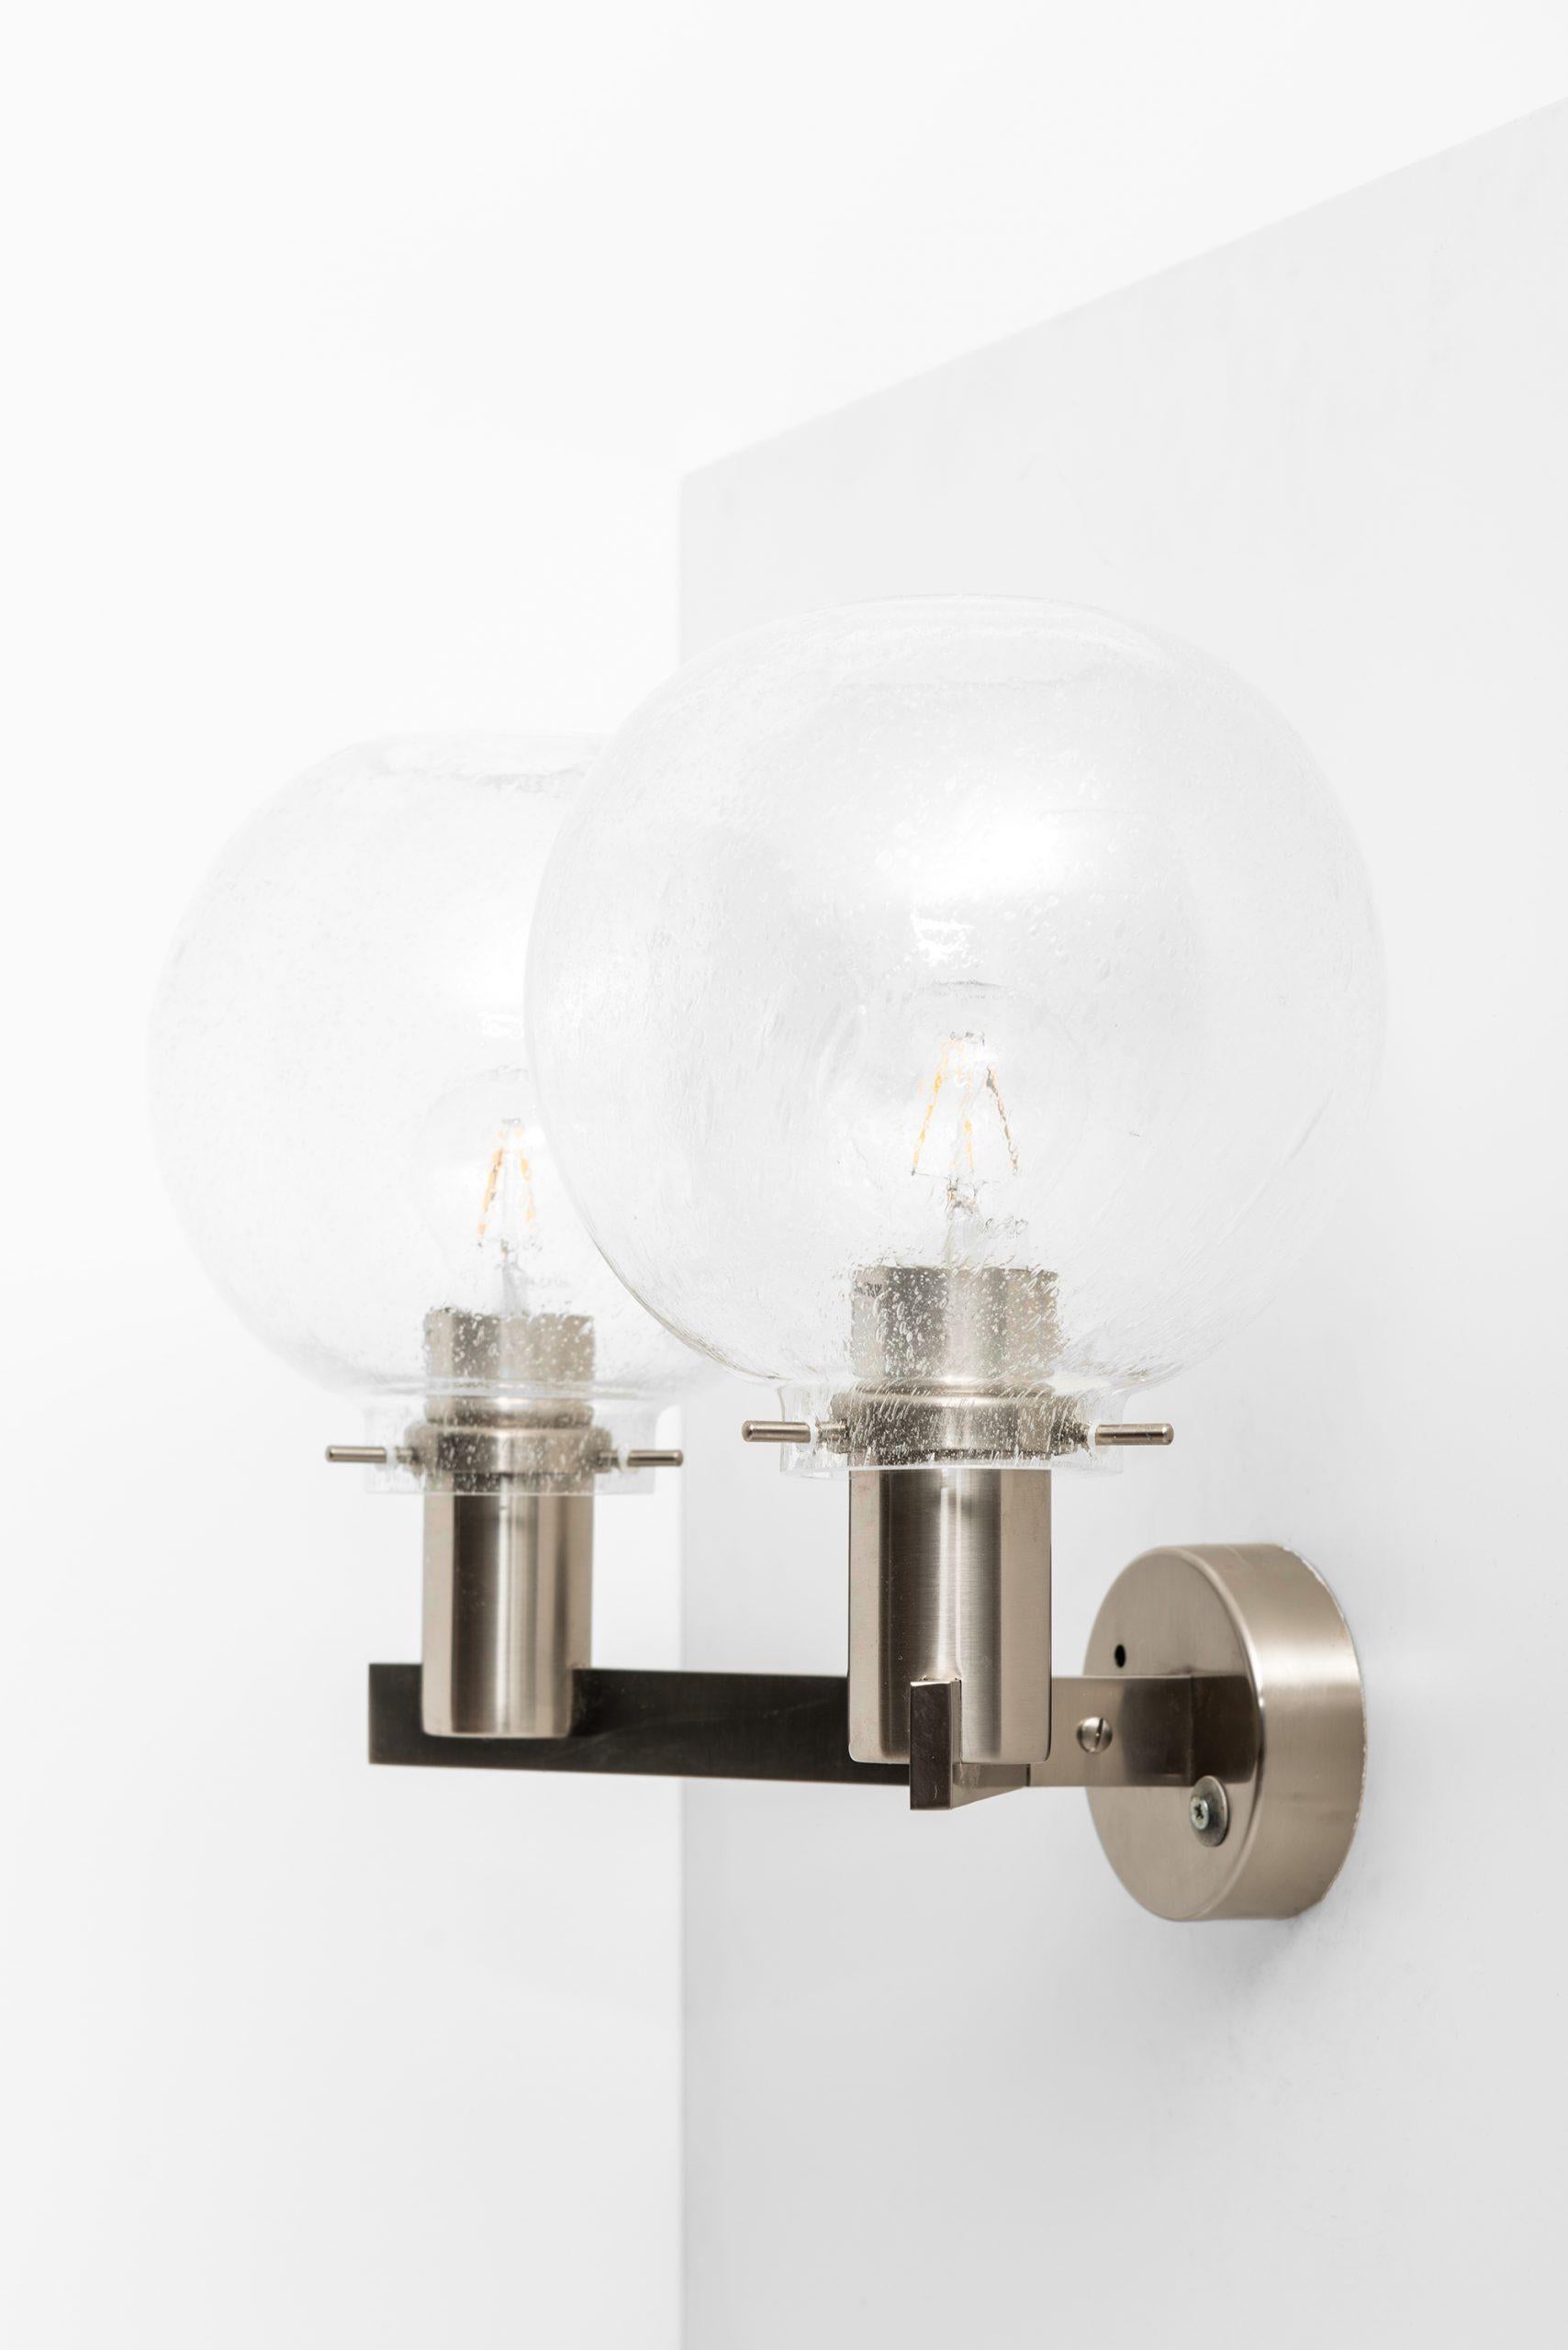 Rare wall lamps model V-305/2 designed by Hans-Agne Jakobsson. Produced by Hans-Agne Jakobsson AB in Markaryd, Sweden.
This model can also be mounted with the glass bowls down.

Listed price is / lamp.